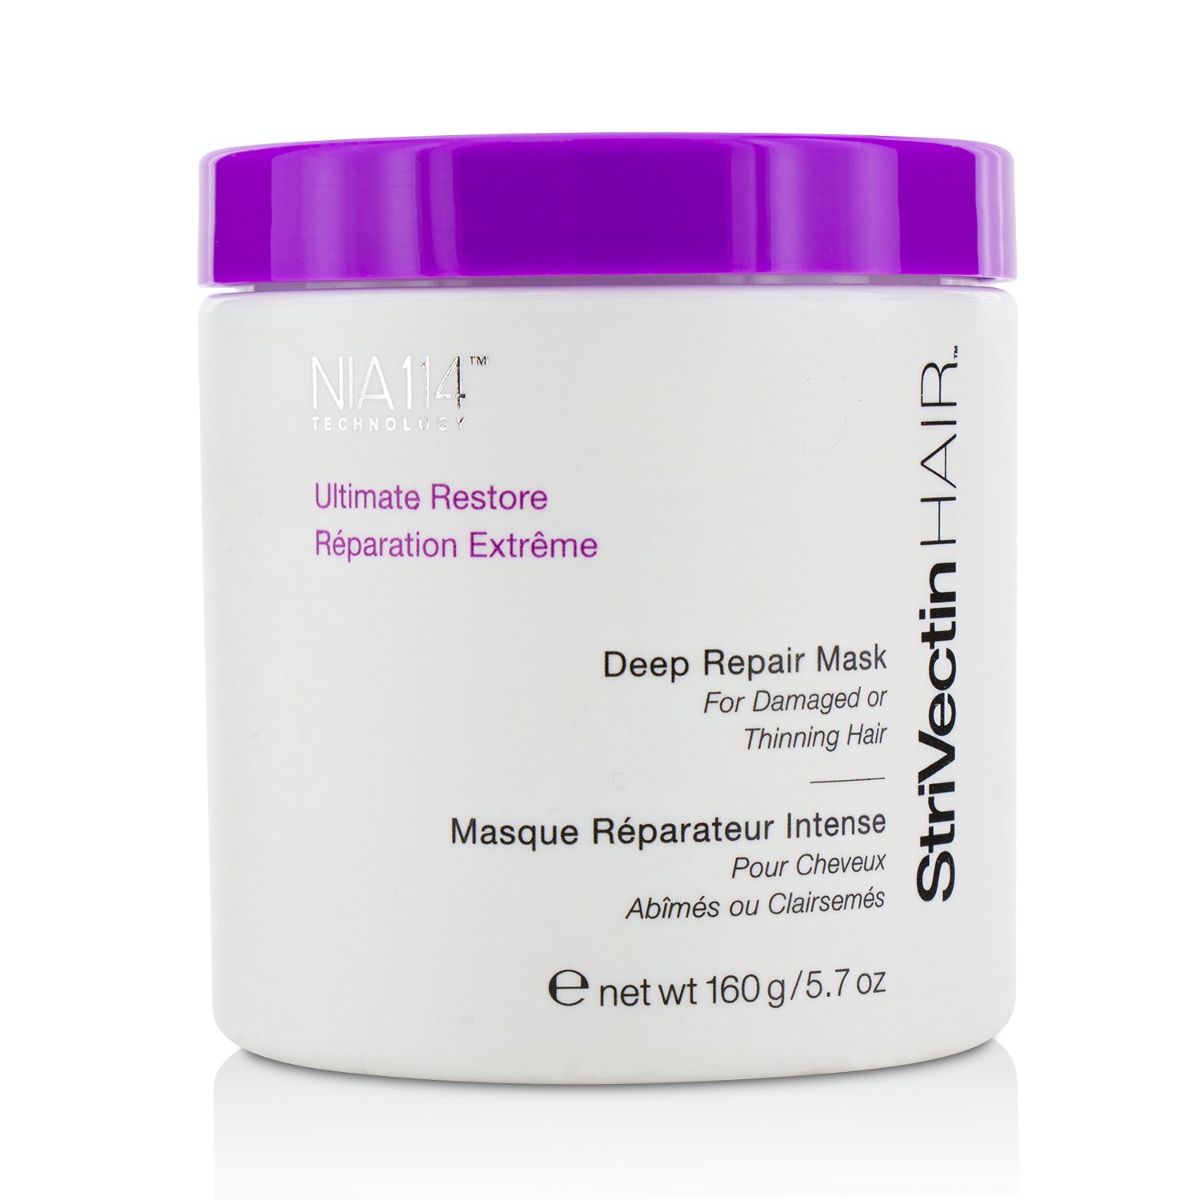 Ultimate Restore Deep Repair Mask (For Damaged or Thinning Hair) StriVectin Image